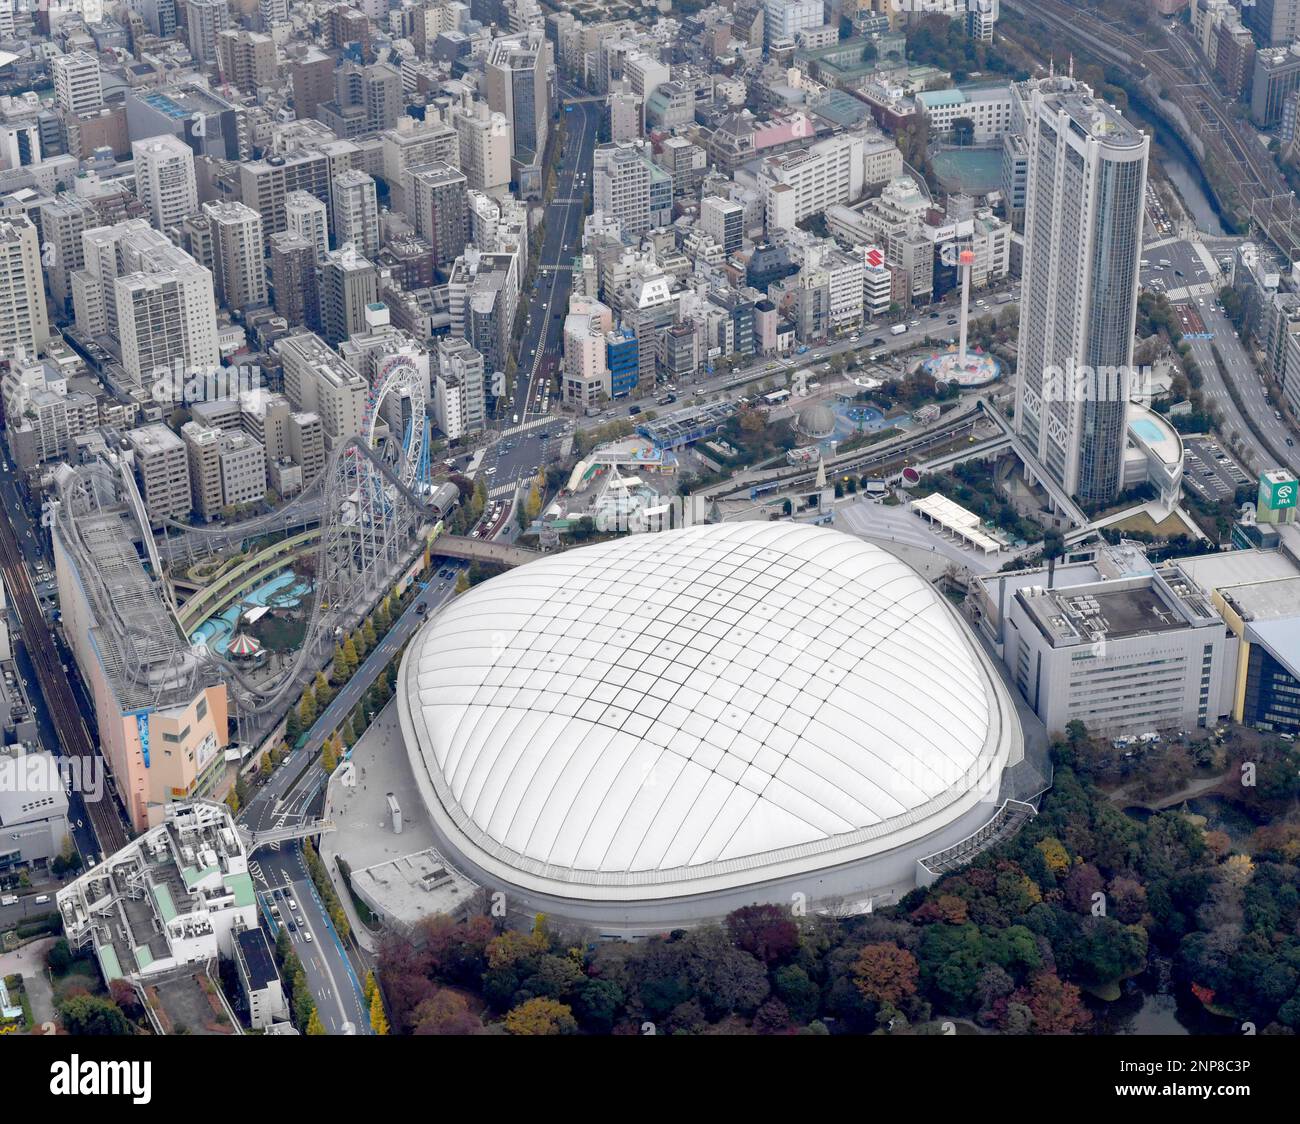 An aerial photo shows Tokyo Dome in Bunkyo Ward, Tokyo on November 27,  2020. Tokyo Dome is a stadium and has a maximum total capacity of 57,000  depending on configuration, with an